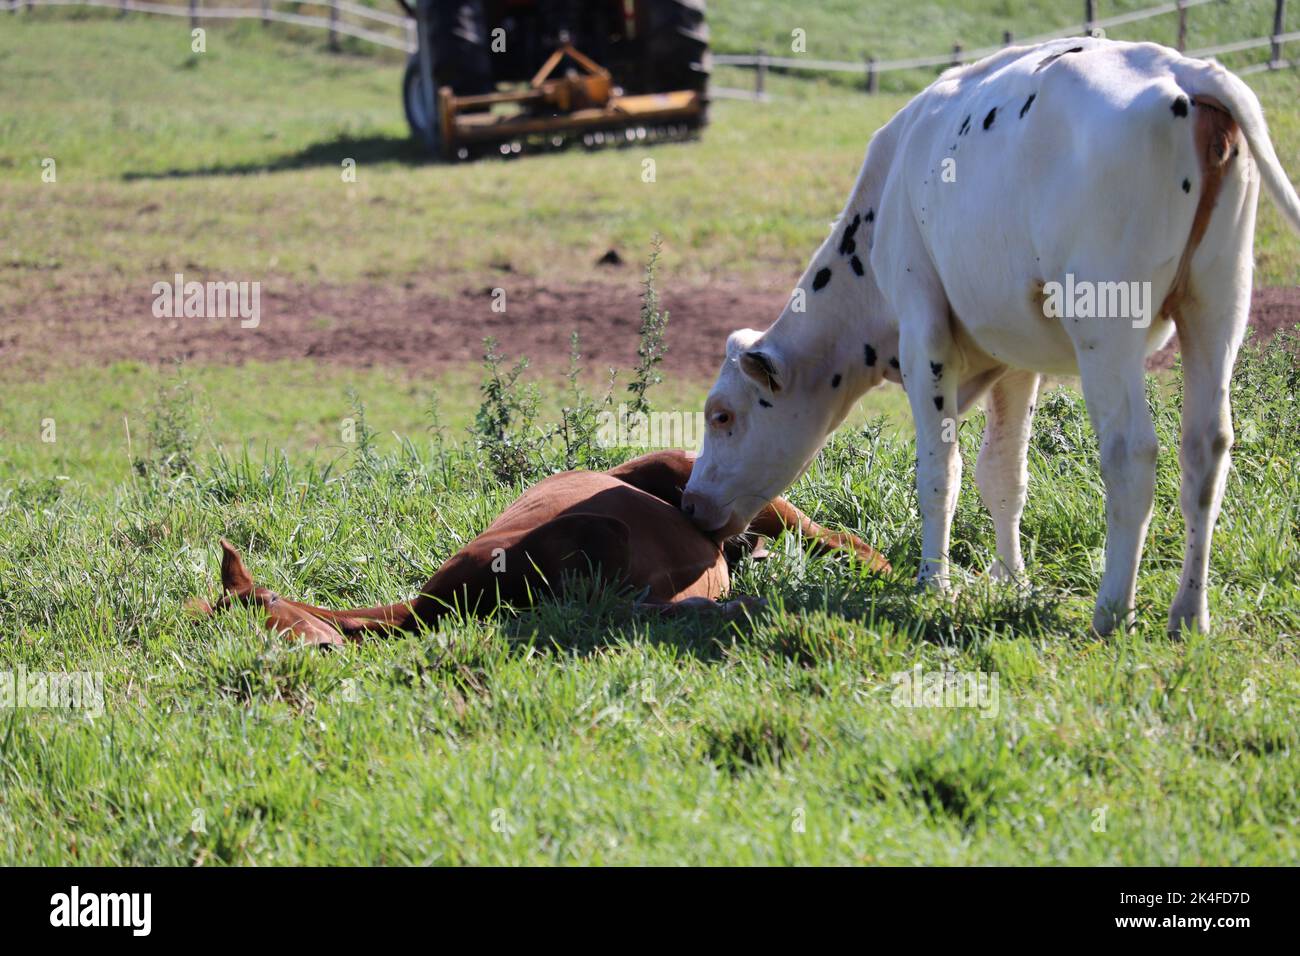 A white cow with small black spots playing with a brown horse on a field Stock Photo